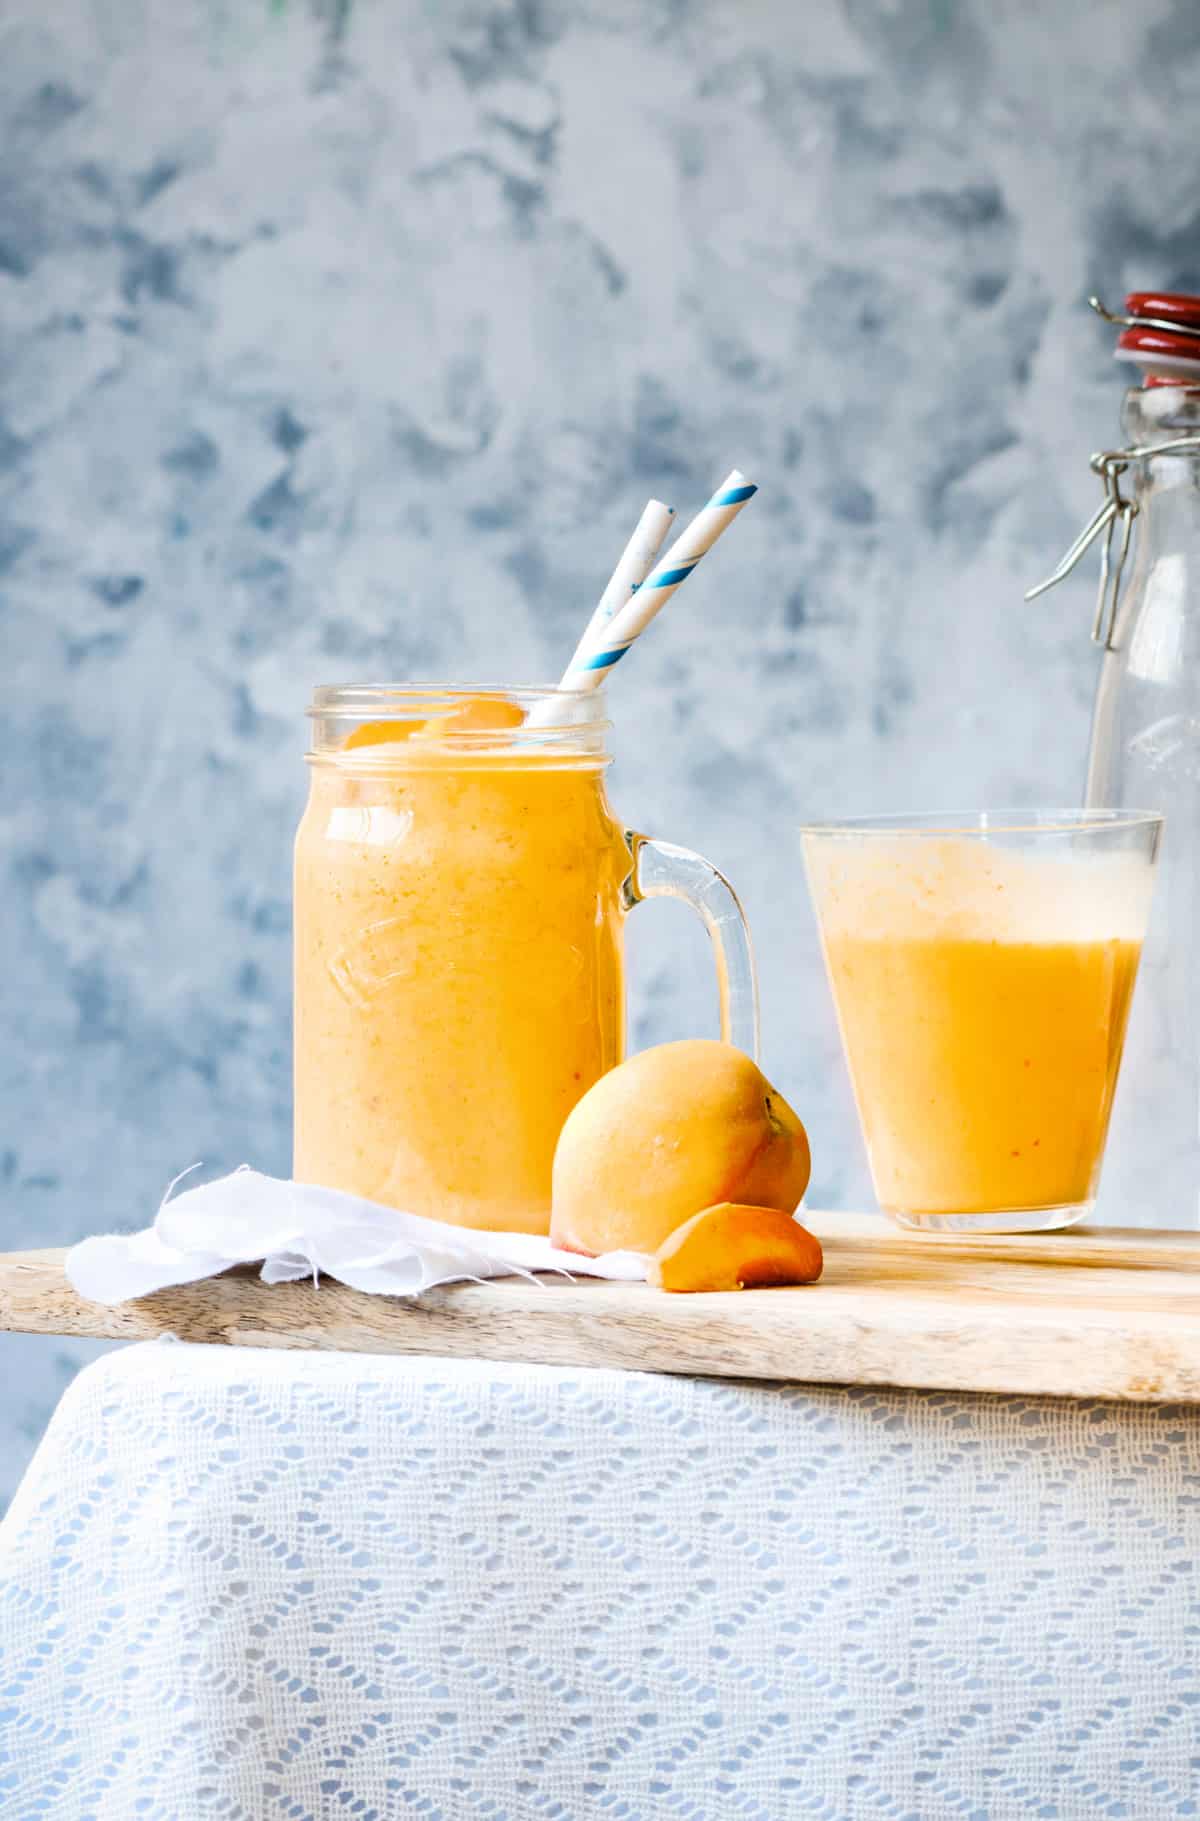 clear glass filled with mango peach smoothie and garnished with a blue and white paper straw